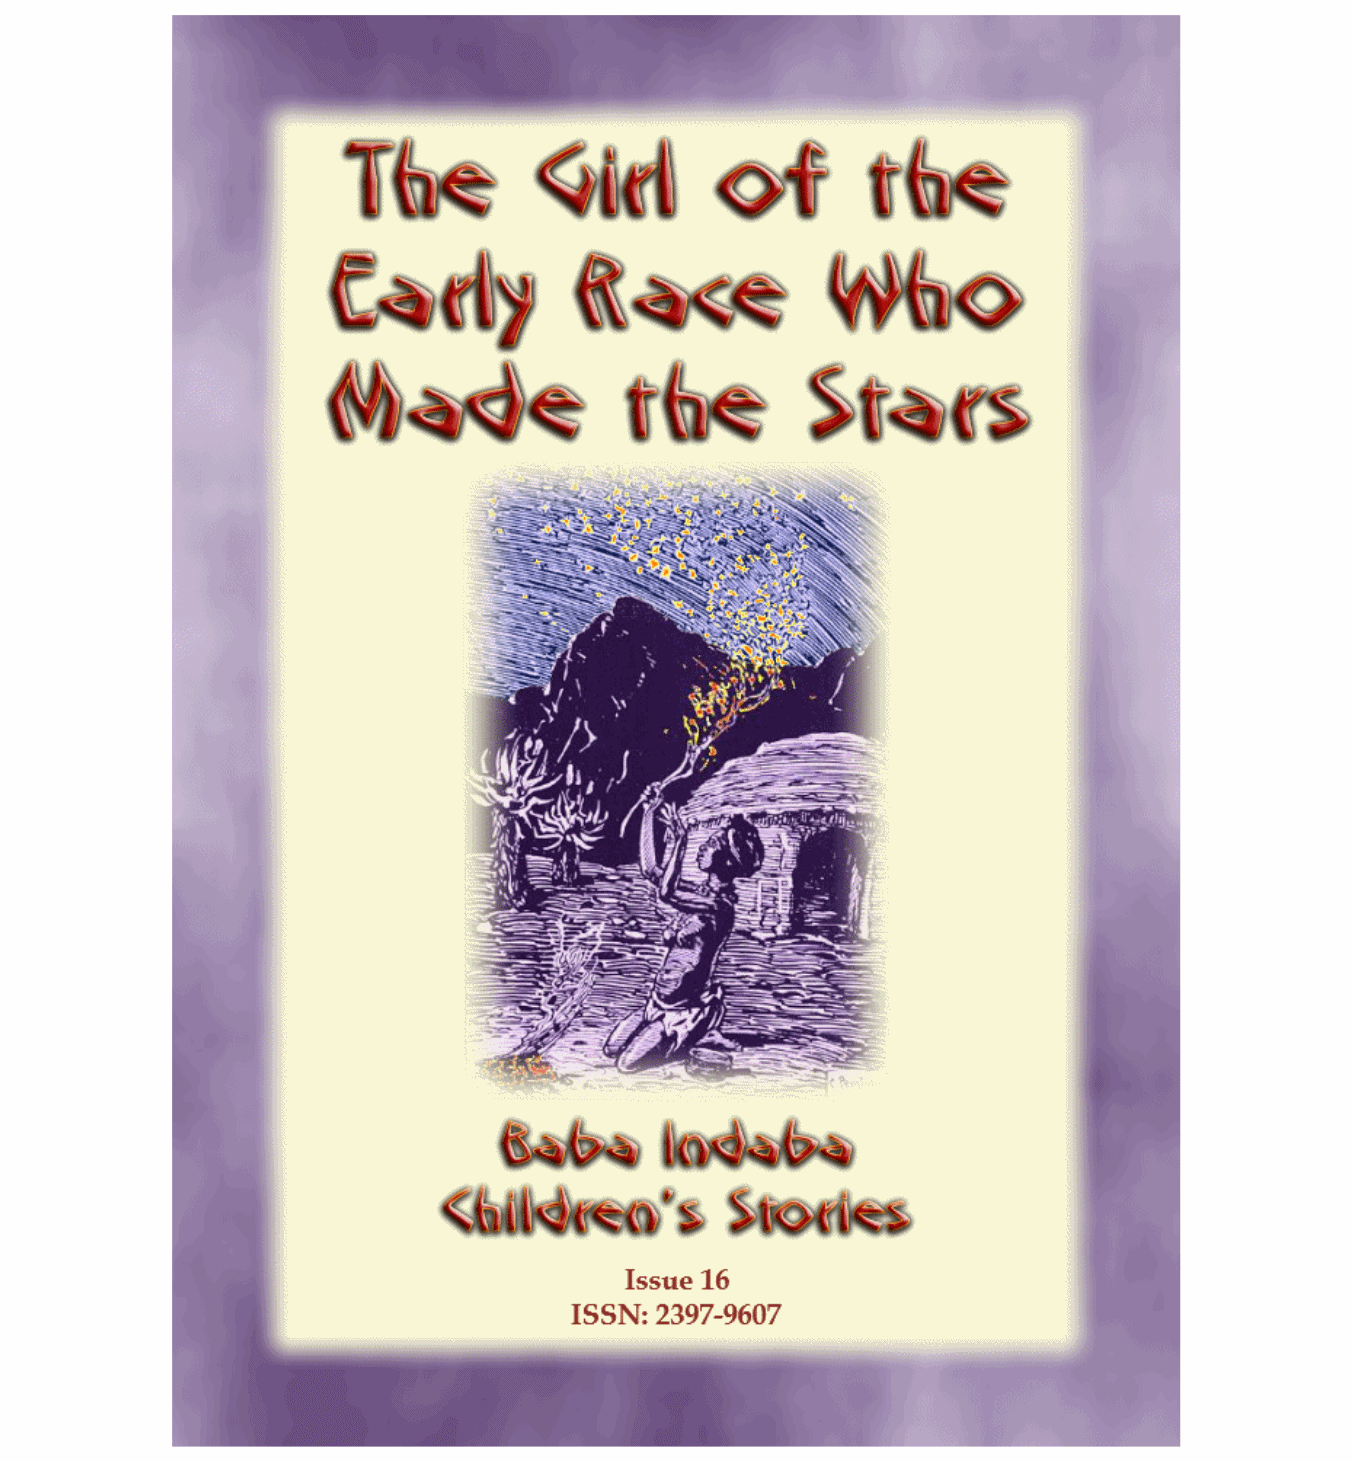 THE GIRL FROM THE EARLY RACE WHO MADE THE STARS - An African Legend: Baba Indaba Children's Stories - Issue 016 